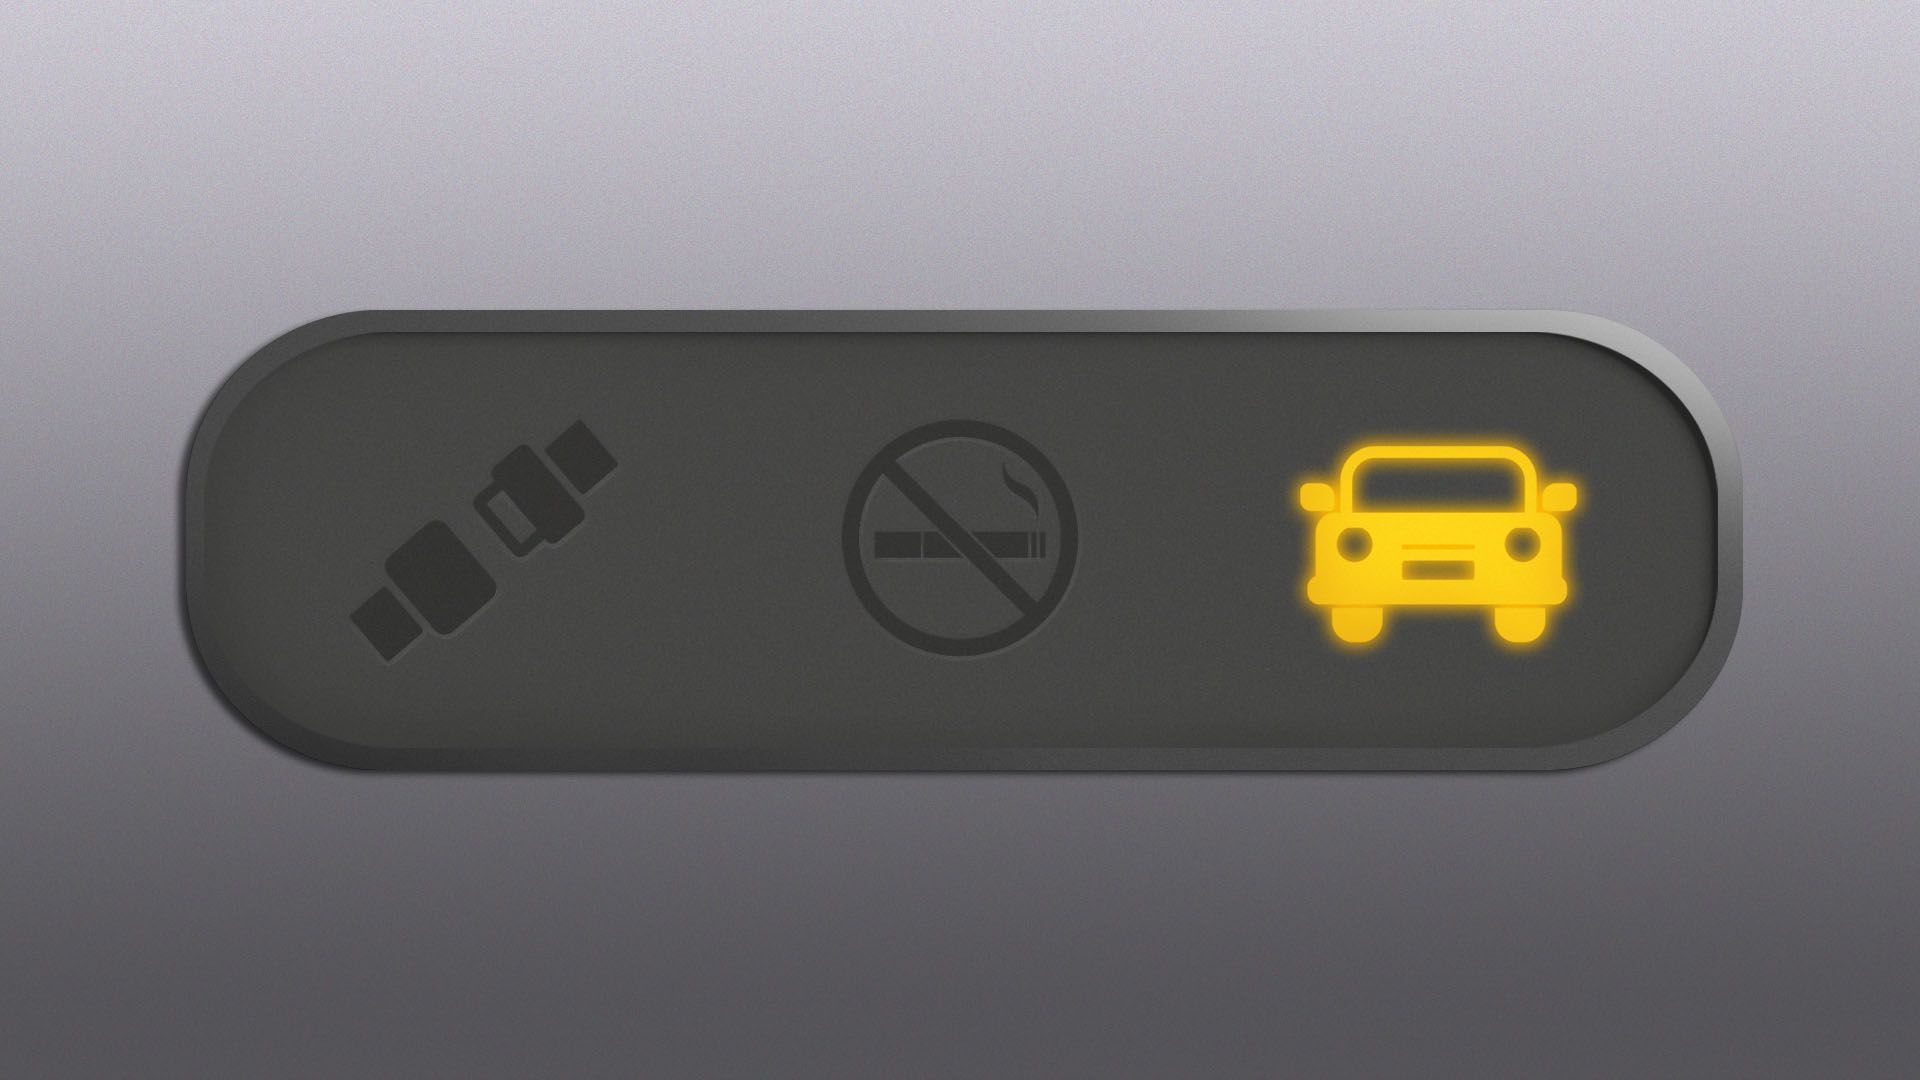 An illustration of an overhead panel in a passenger plane showing a no smoking symbol, a seatbelt symbol and an illuminated car symbol 